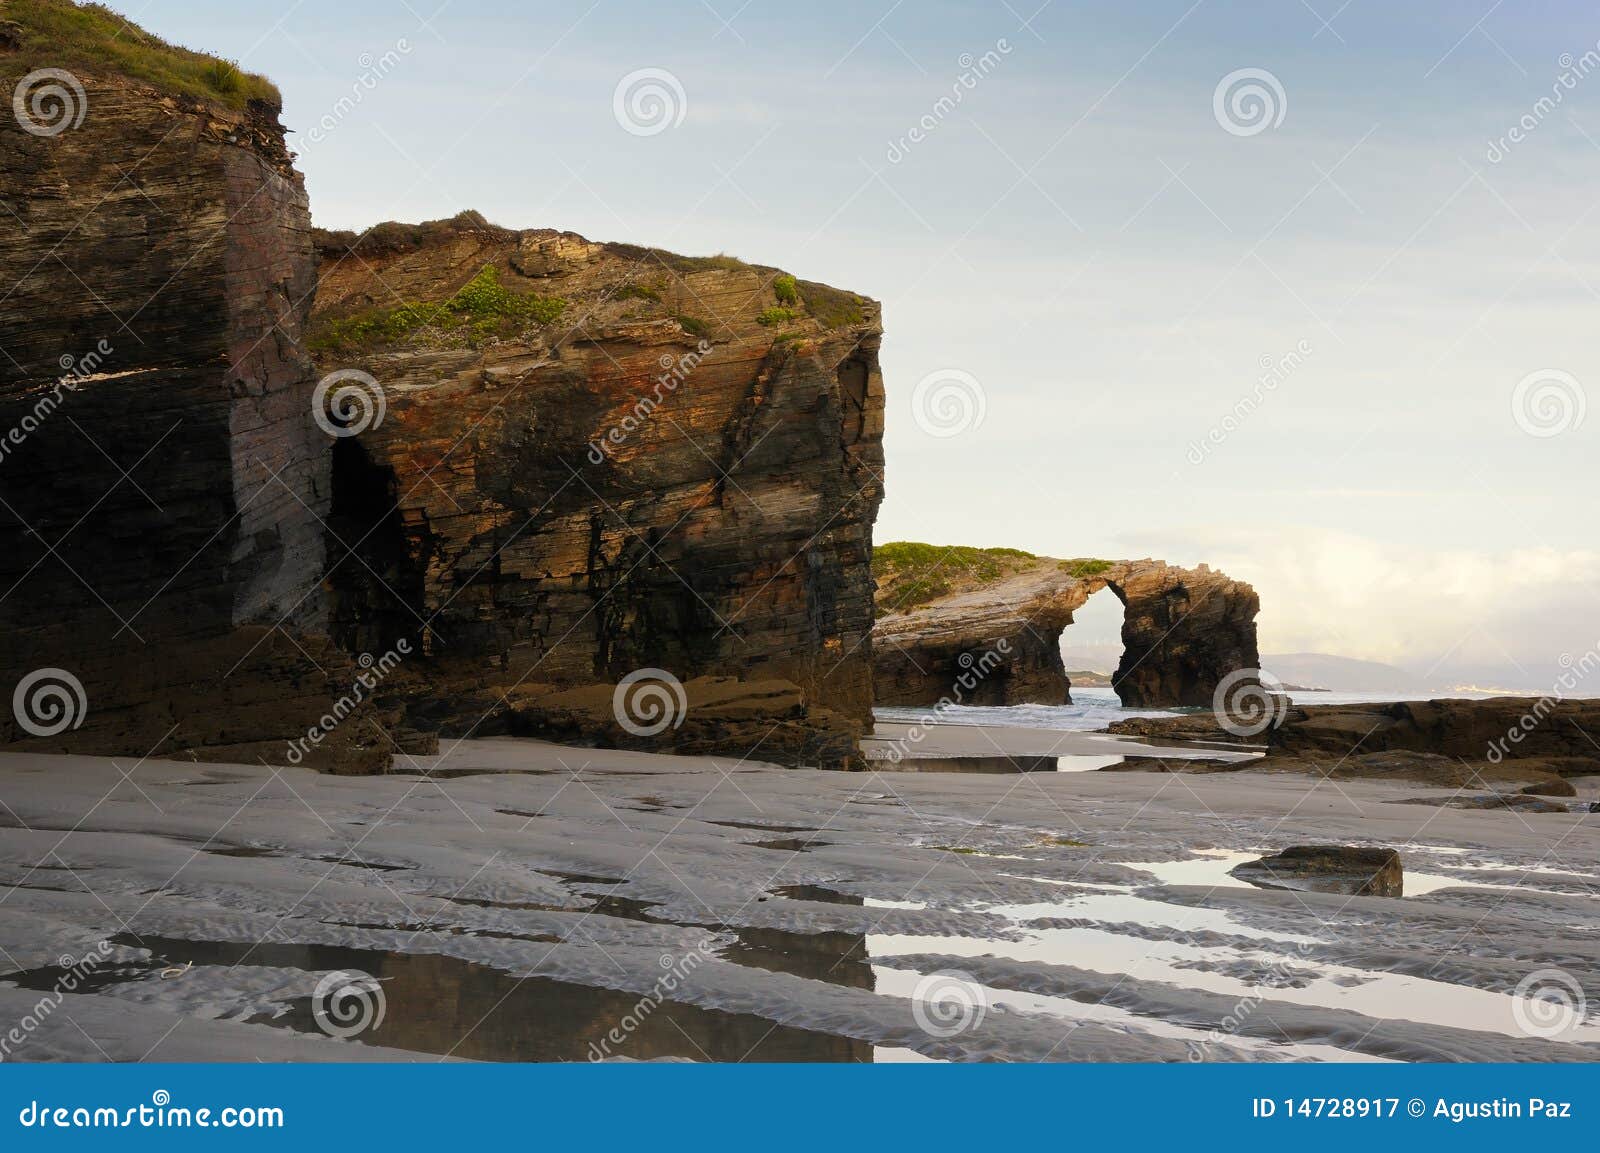 early morning in llas catedrales beach